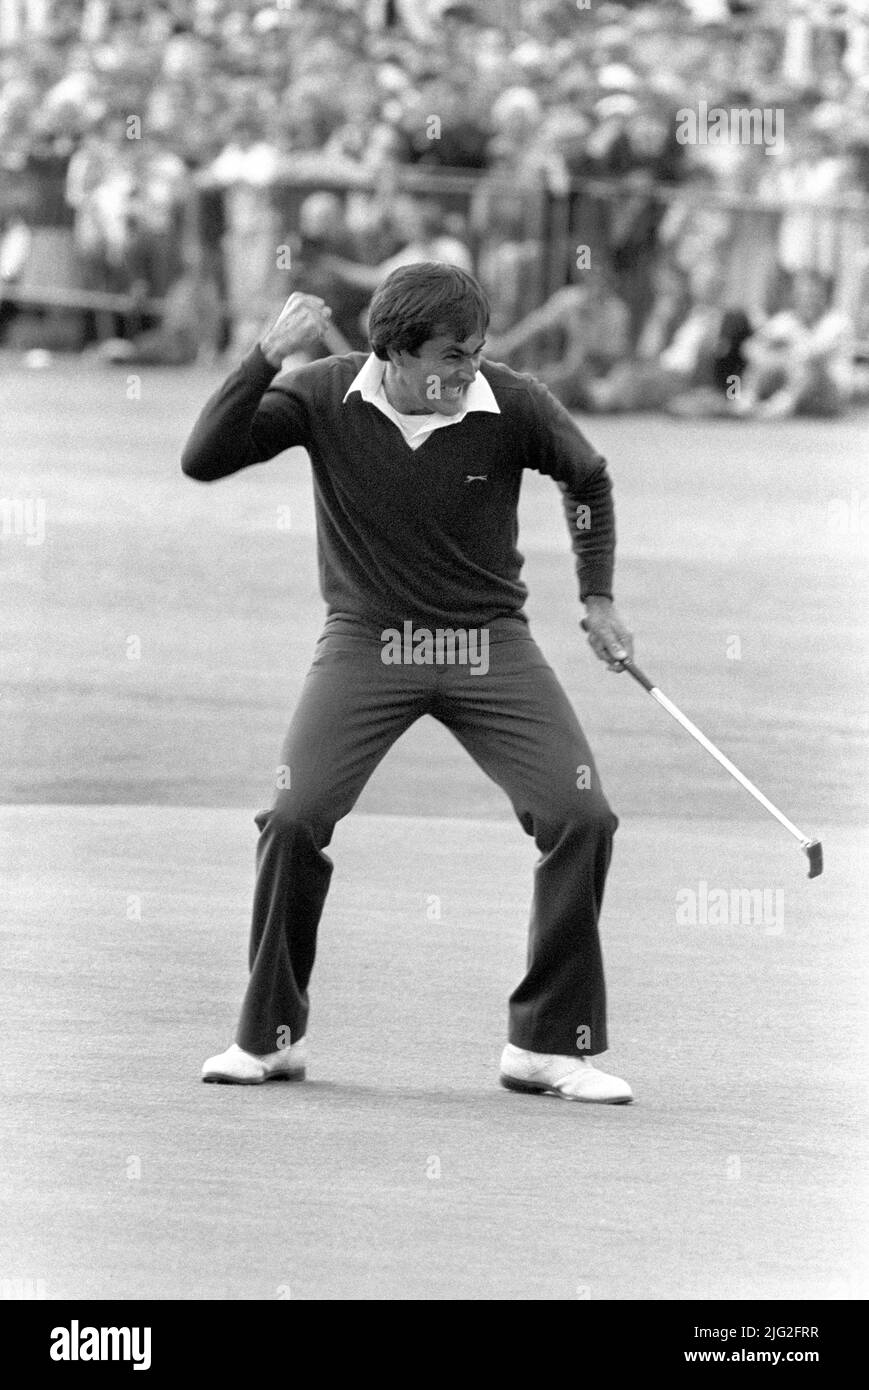 File photo dated 22-07-1984 of Spain's Seve Ballesteros, clinches the Open Gold Championship at St Andrew's, Fife, with a birdie putt on the 18th green. He finished on 276, 12 under par. Issue date: Thursday July 7, 2022. Stock Photo